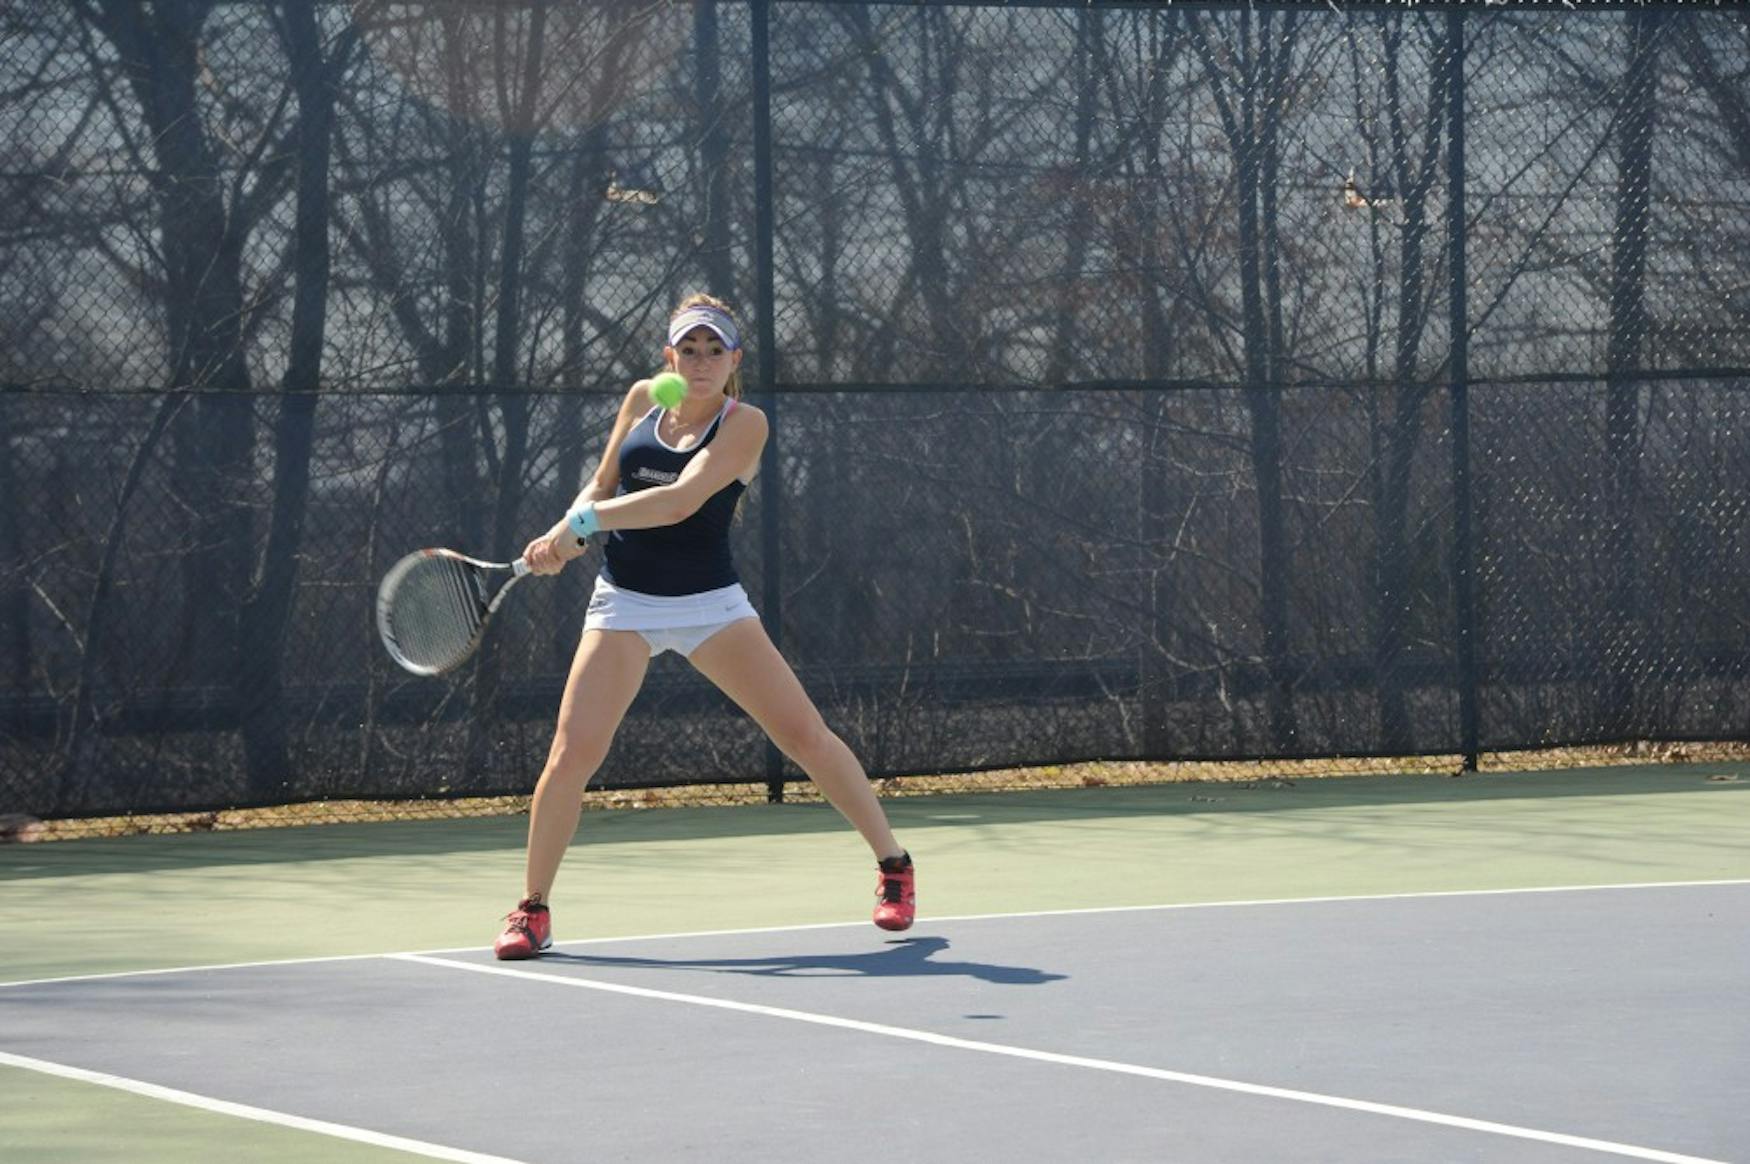 REACHING BACK: Haley Cohen ’18 takes a backhand stroke in a match against New York University at home on April 18.